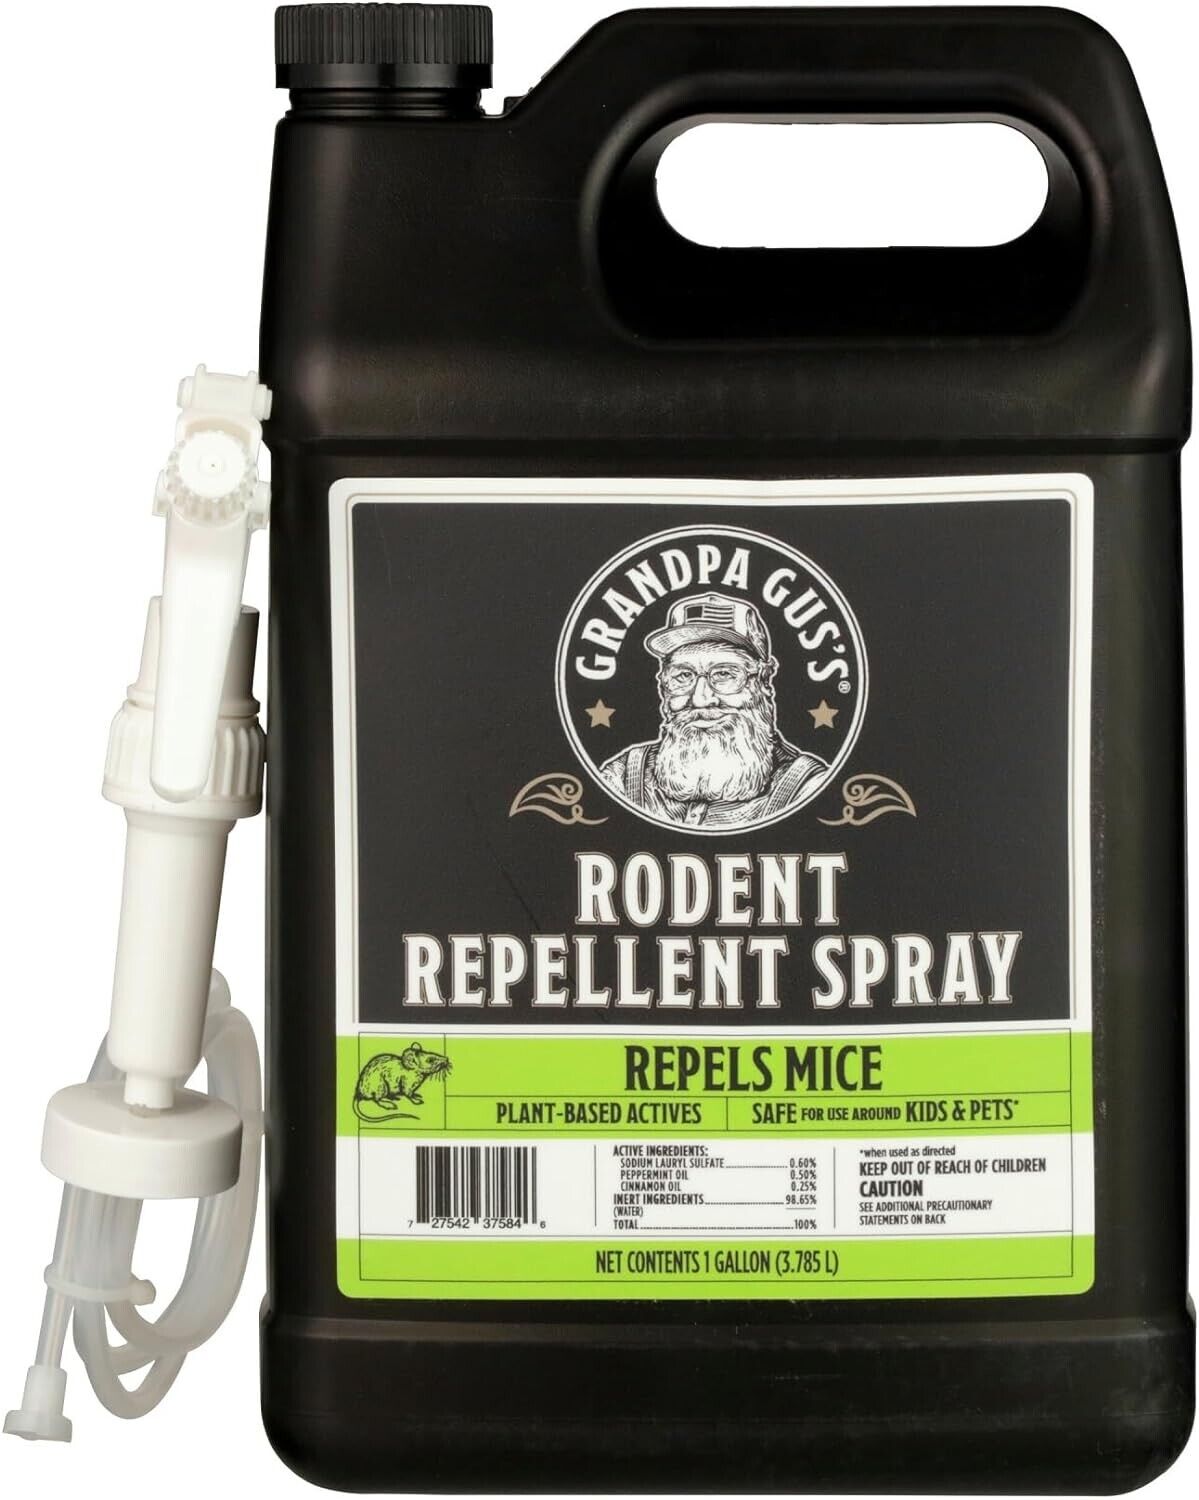 GRANDPA GUS'S Mouse Rodent Repellent, Peppermint & Cinnamon Oil Formula, 1 gal.